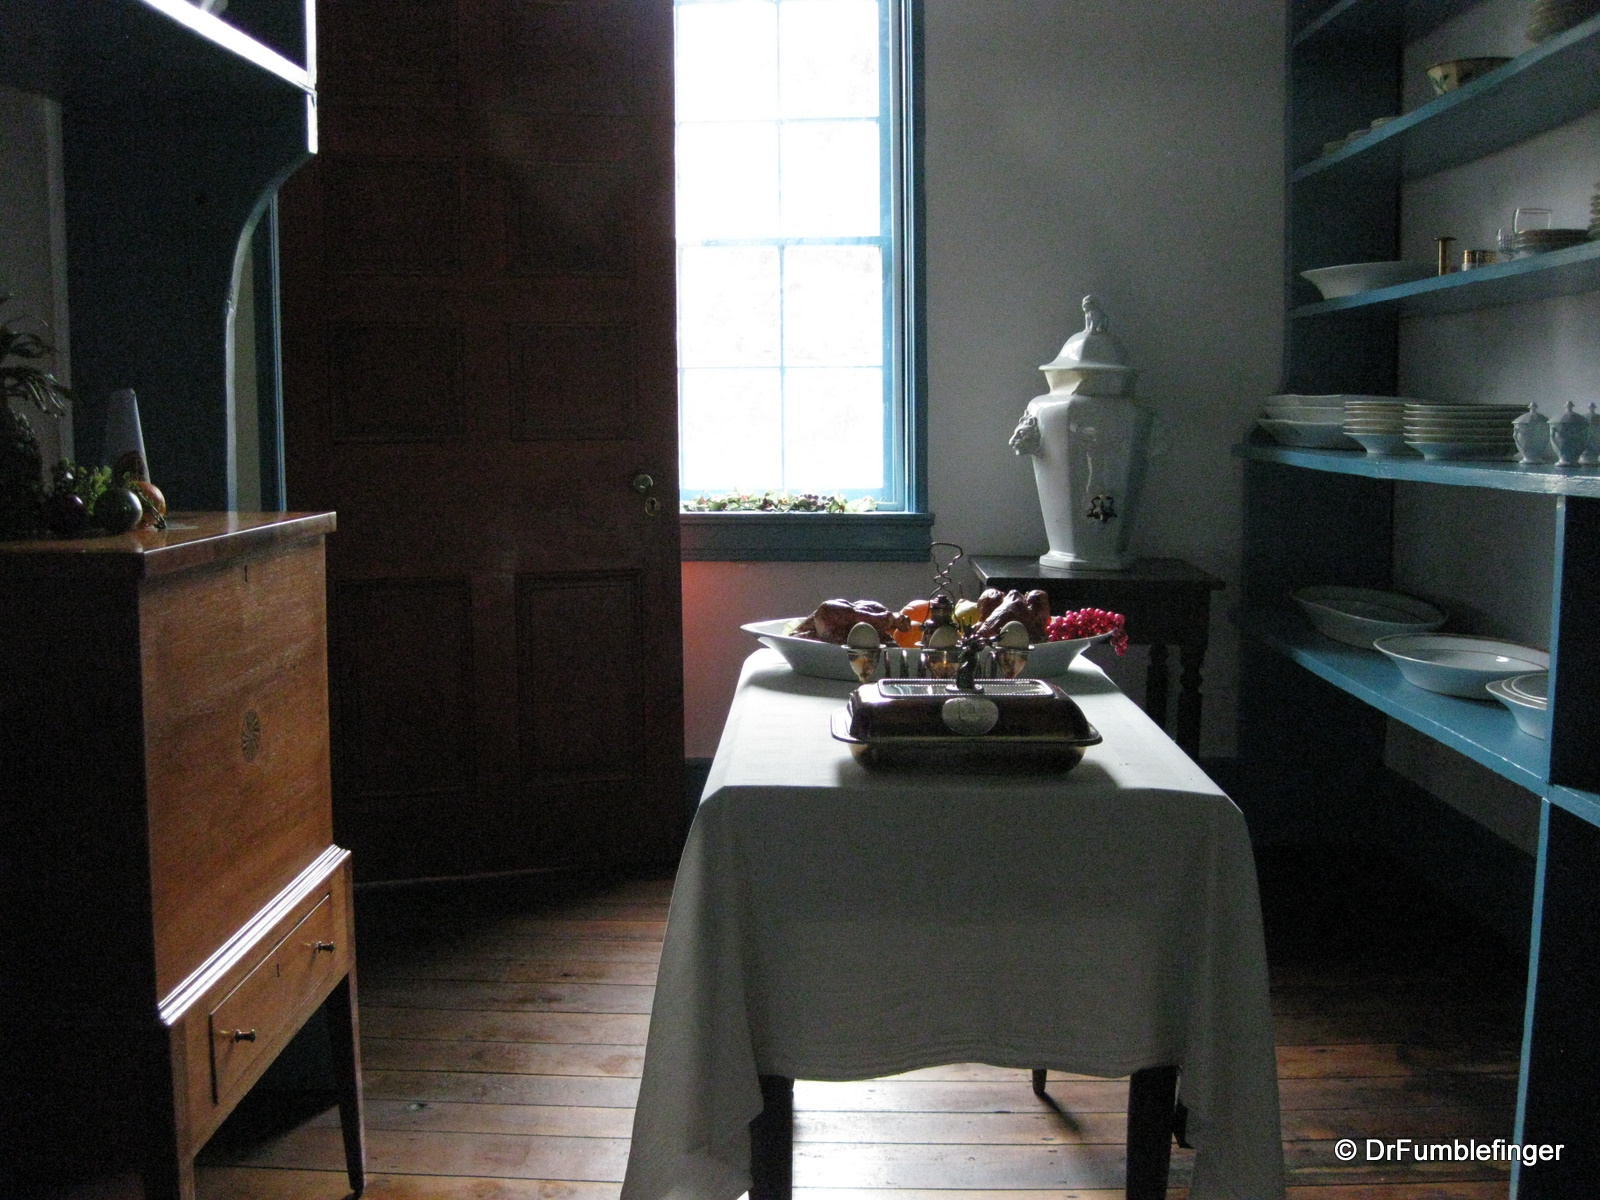 Pantry at the Hermitage